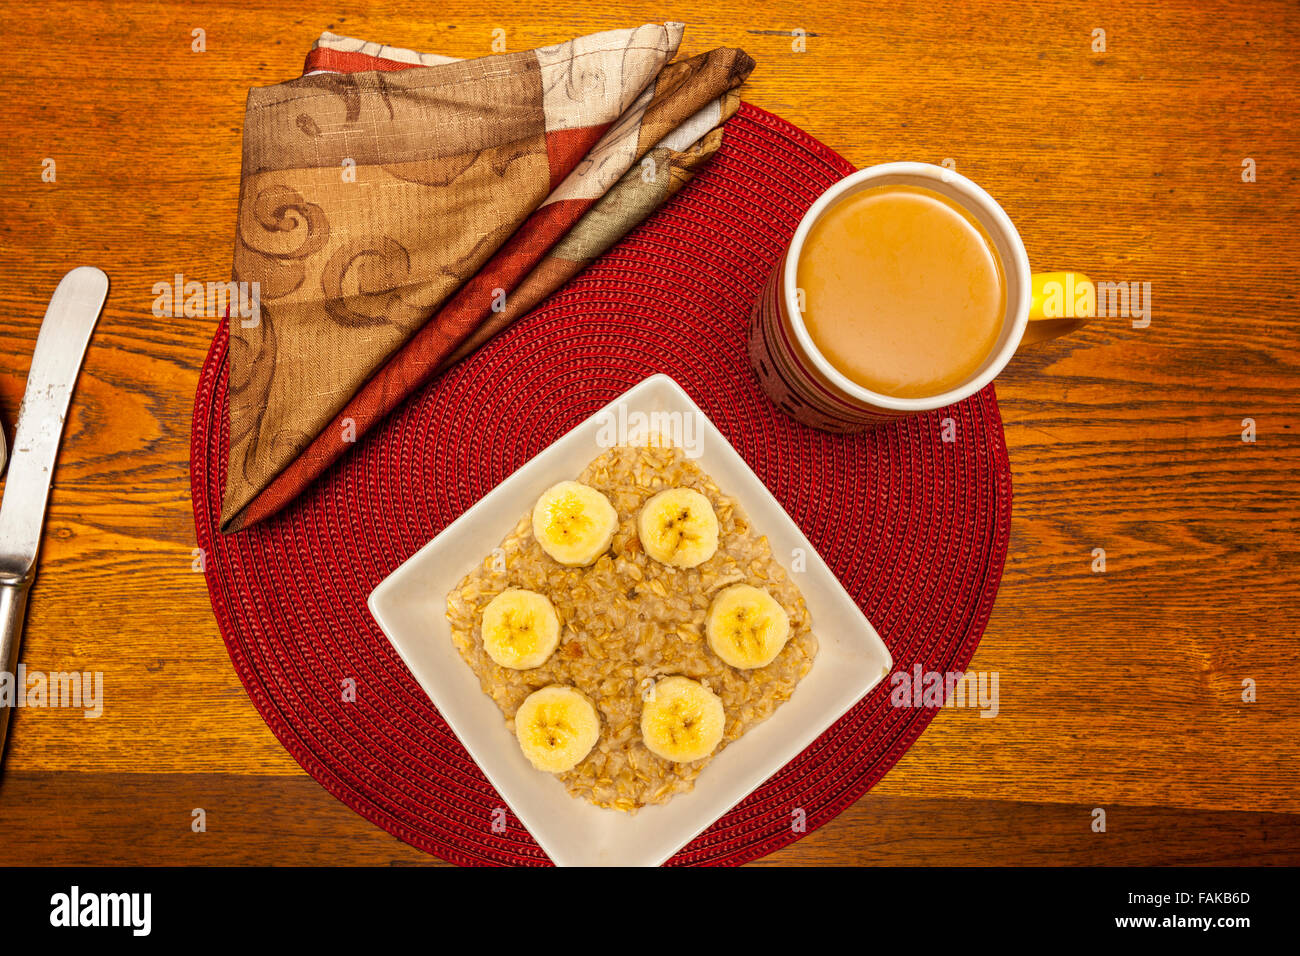 A bowl of oatmeal with banana slices and cinnamon on a round placemat on a wooden table Stock Photo